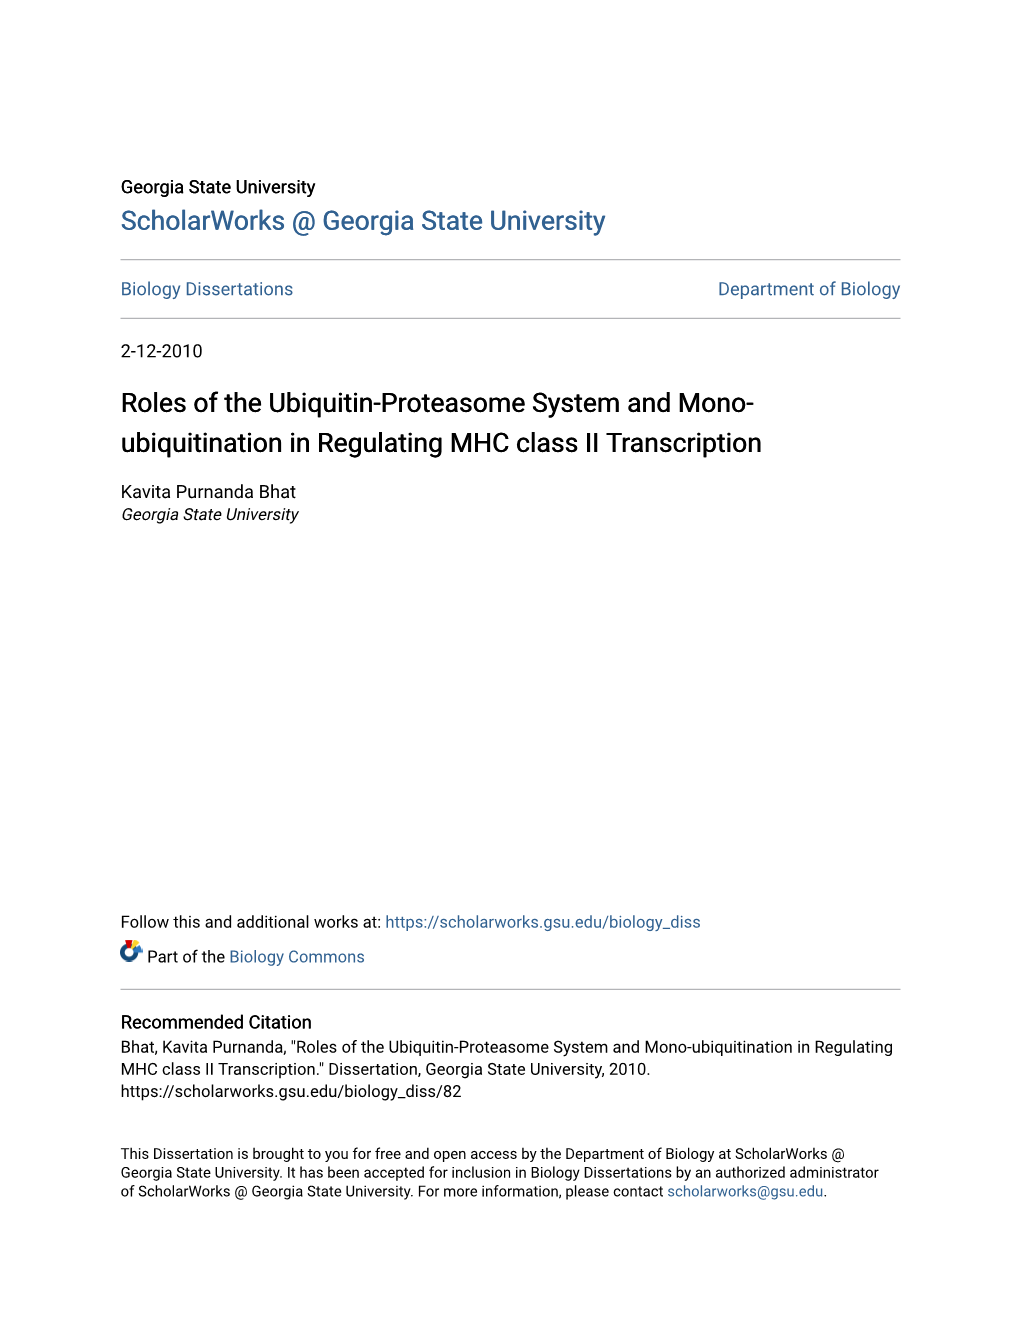 Roles of the Ubiquitin-Proteasome System and Mono-Ubiquitination in Regulating MHC Class II Transcription." Dissertation, Georgia State University, 2010